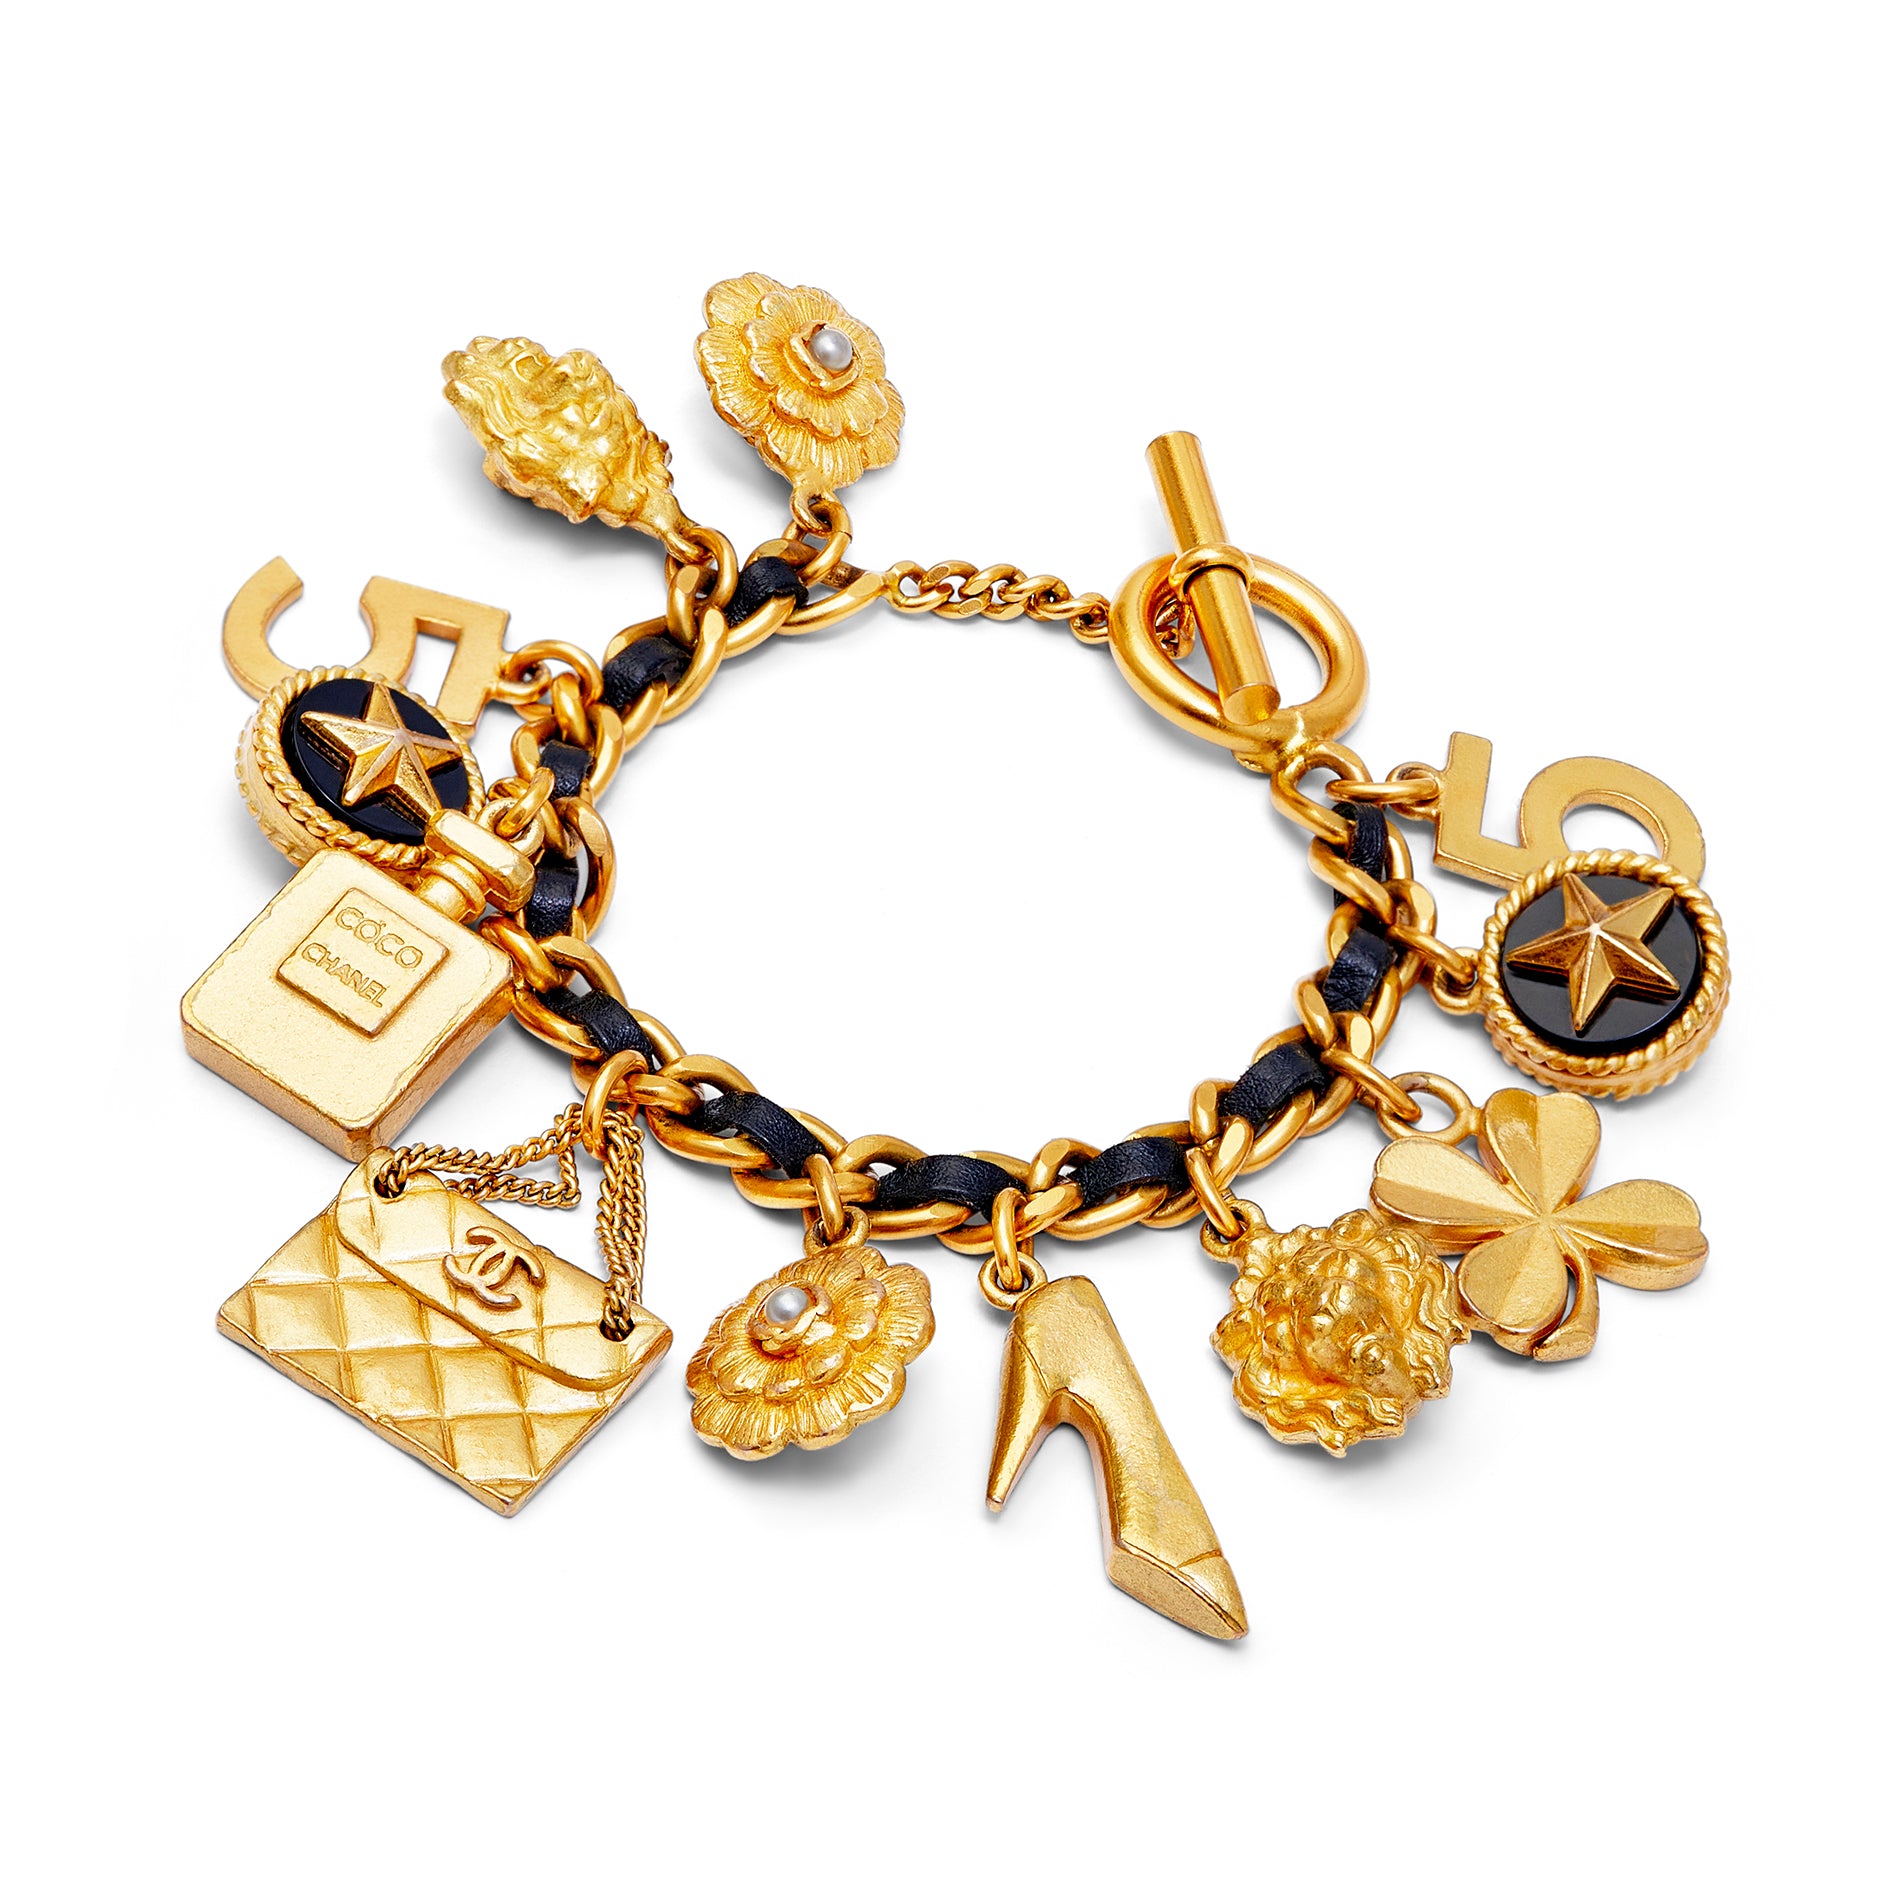 CHANEL, Jewelry, Iconic Vintage Chanel Charms Bracelet